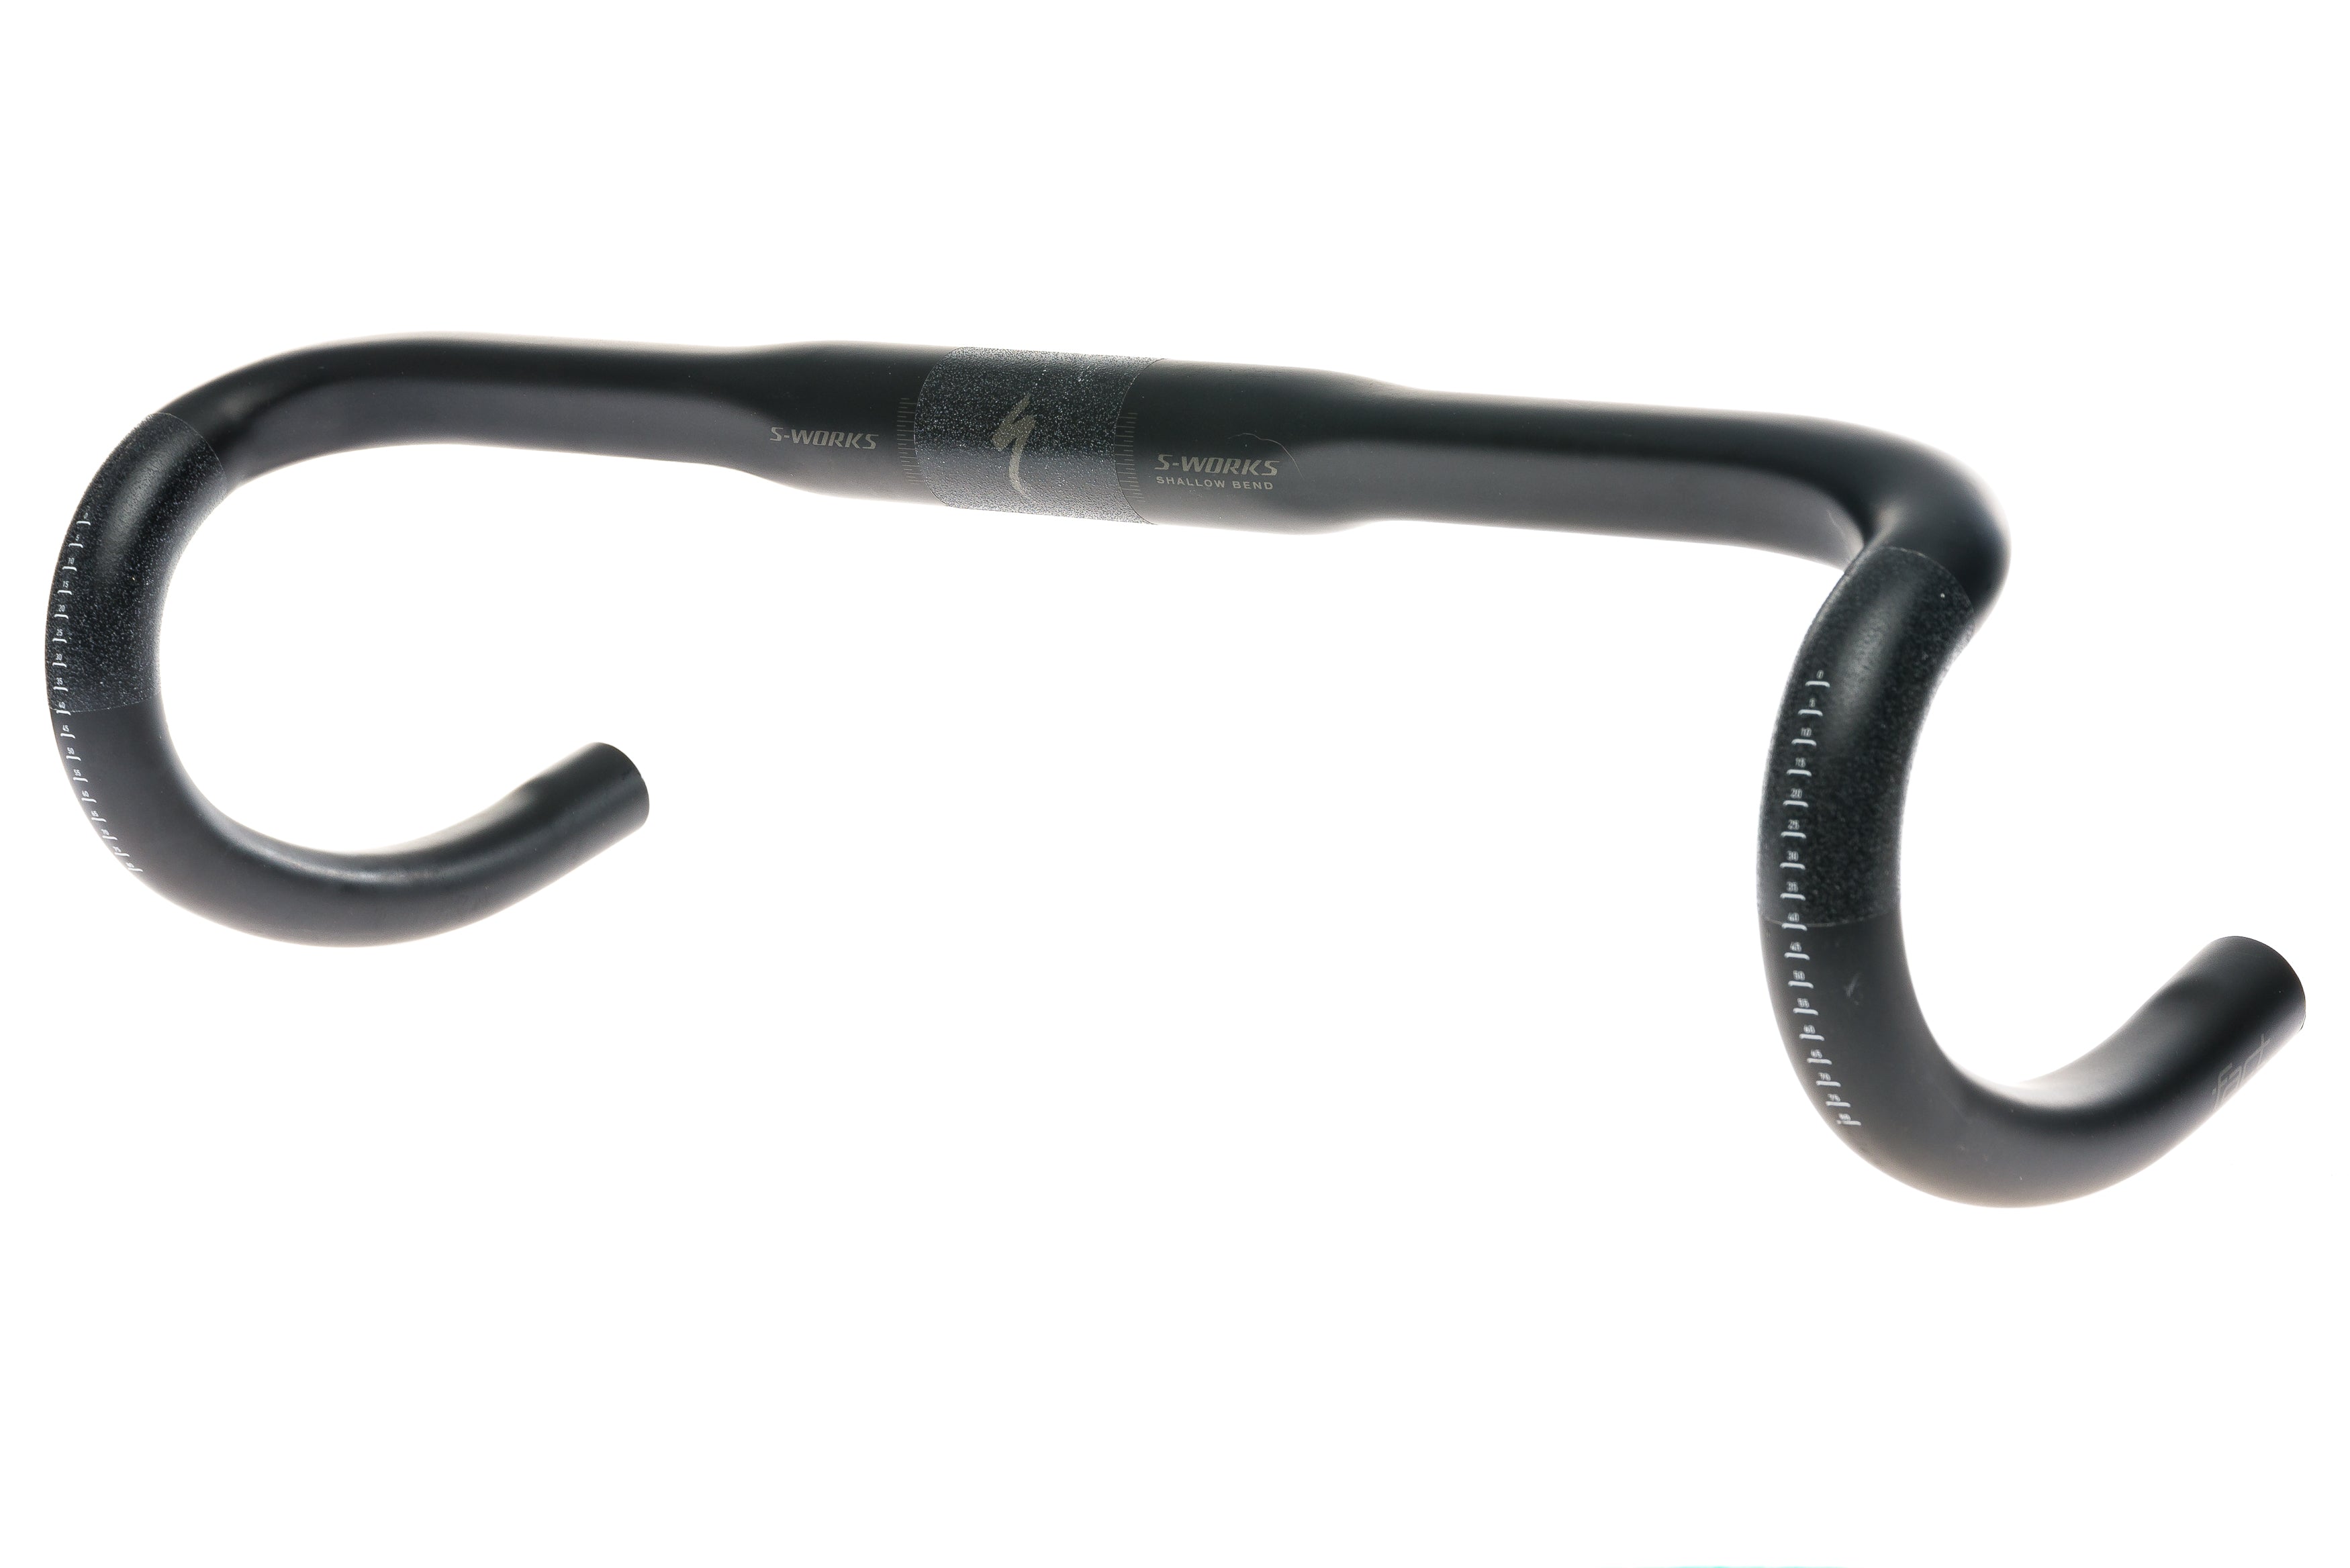 Specialized S-Works Shallow Bend Road Handlebar | The Pro's Closet